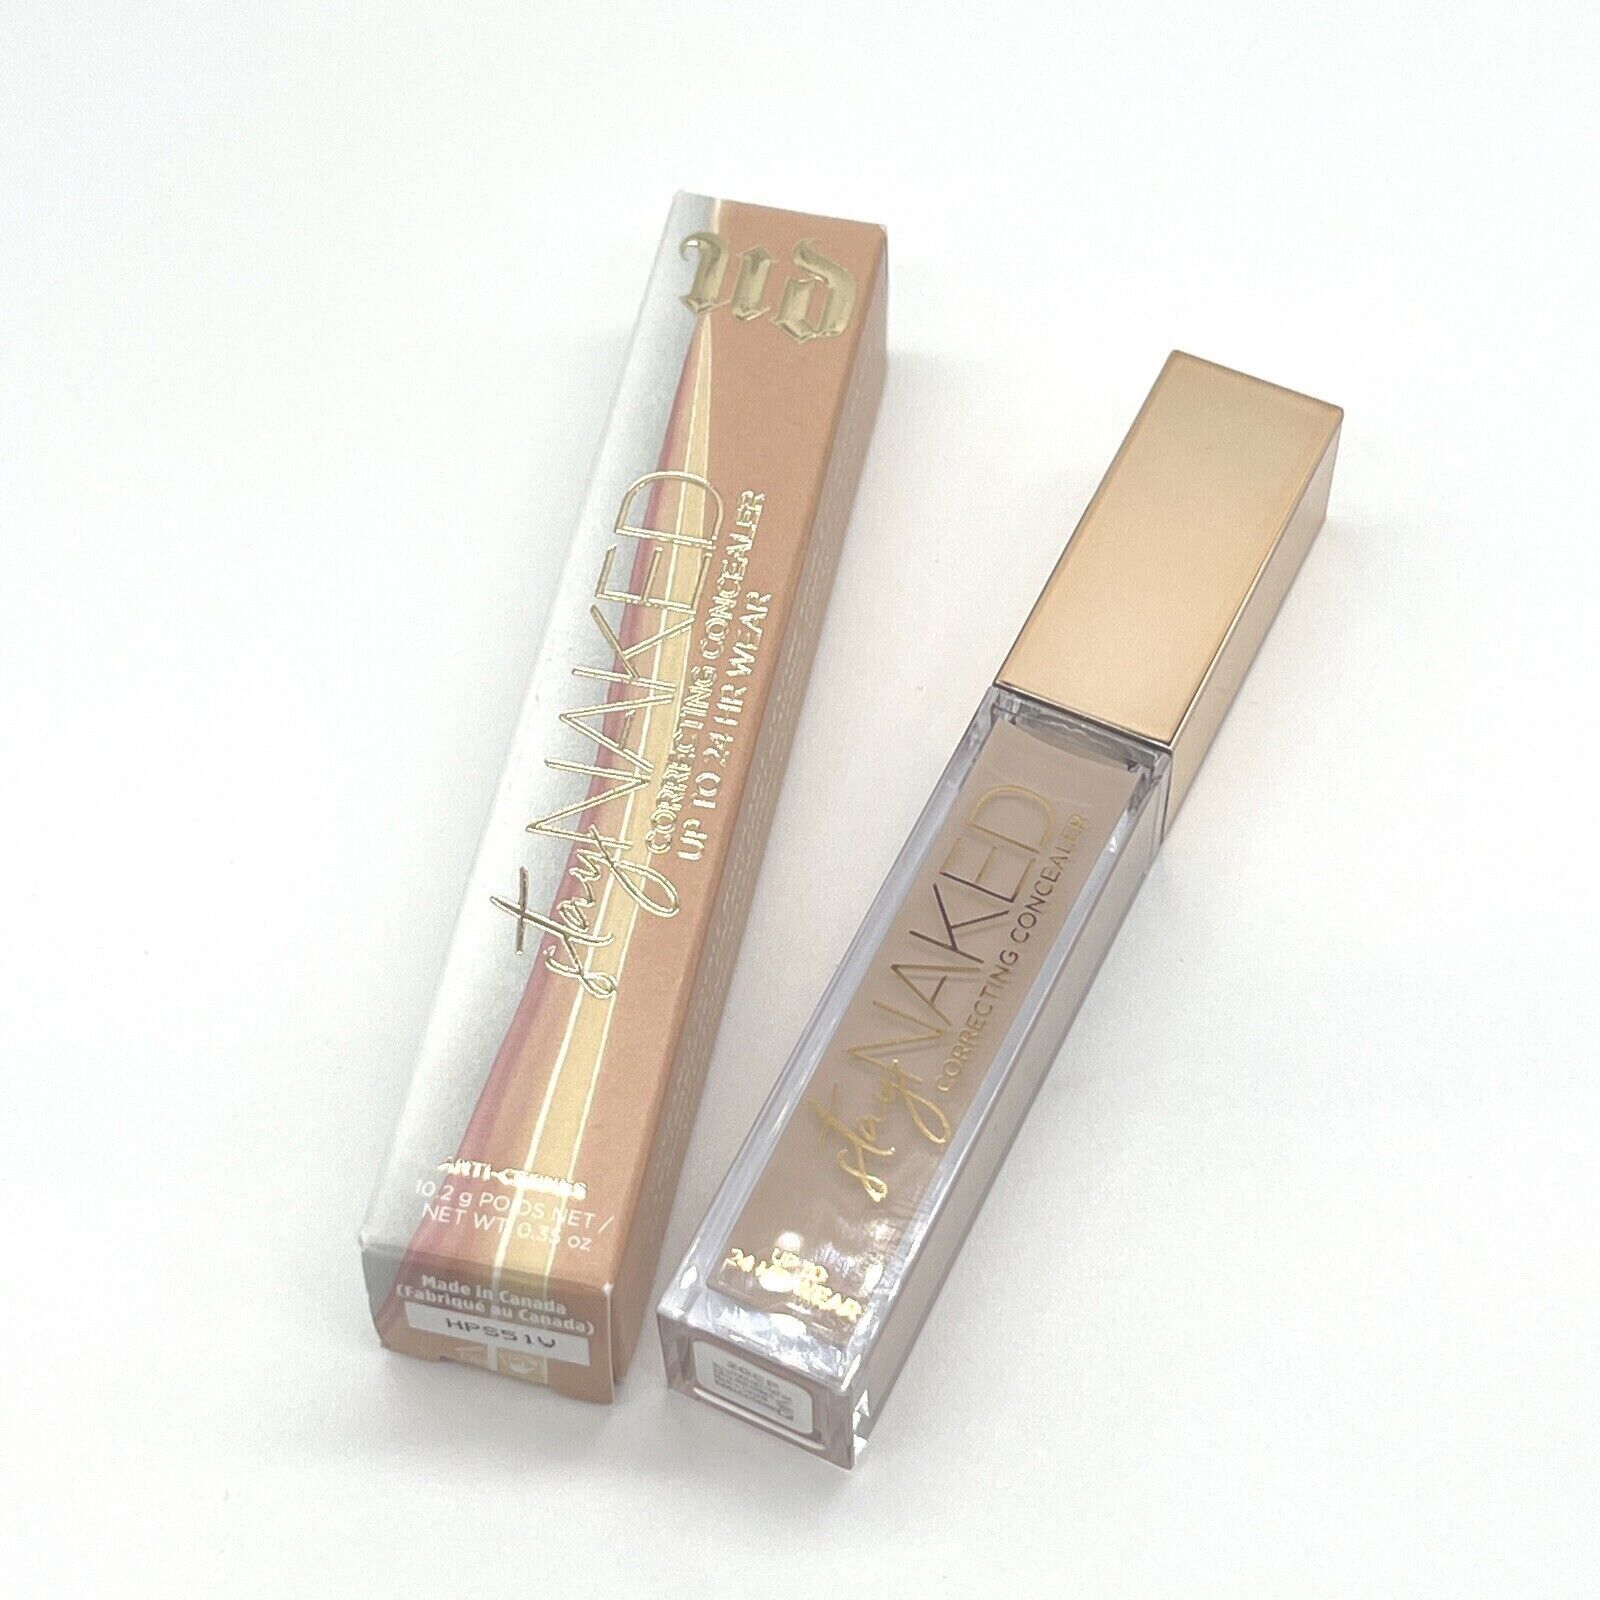 Primary image for Urban Decay Stay Naked Correcting Concealer Up To 24 HR Wear 20CP Fair - 10.2 g